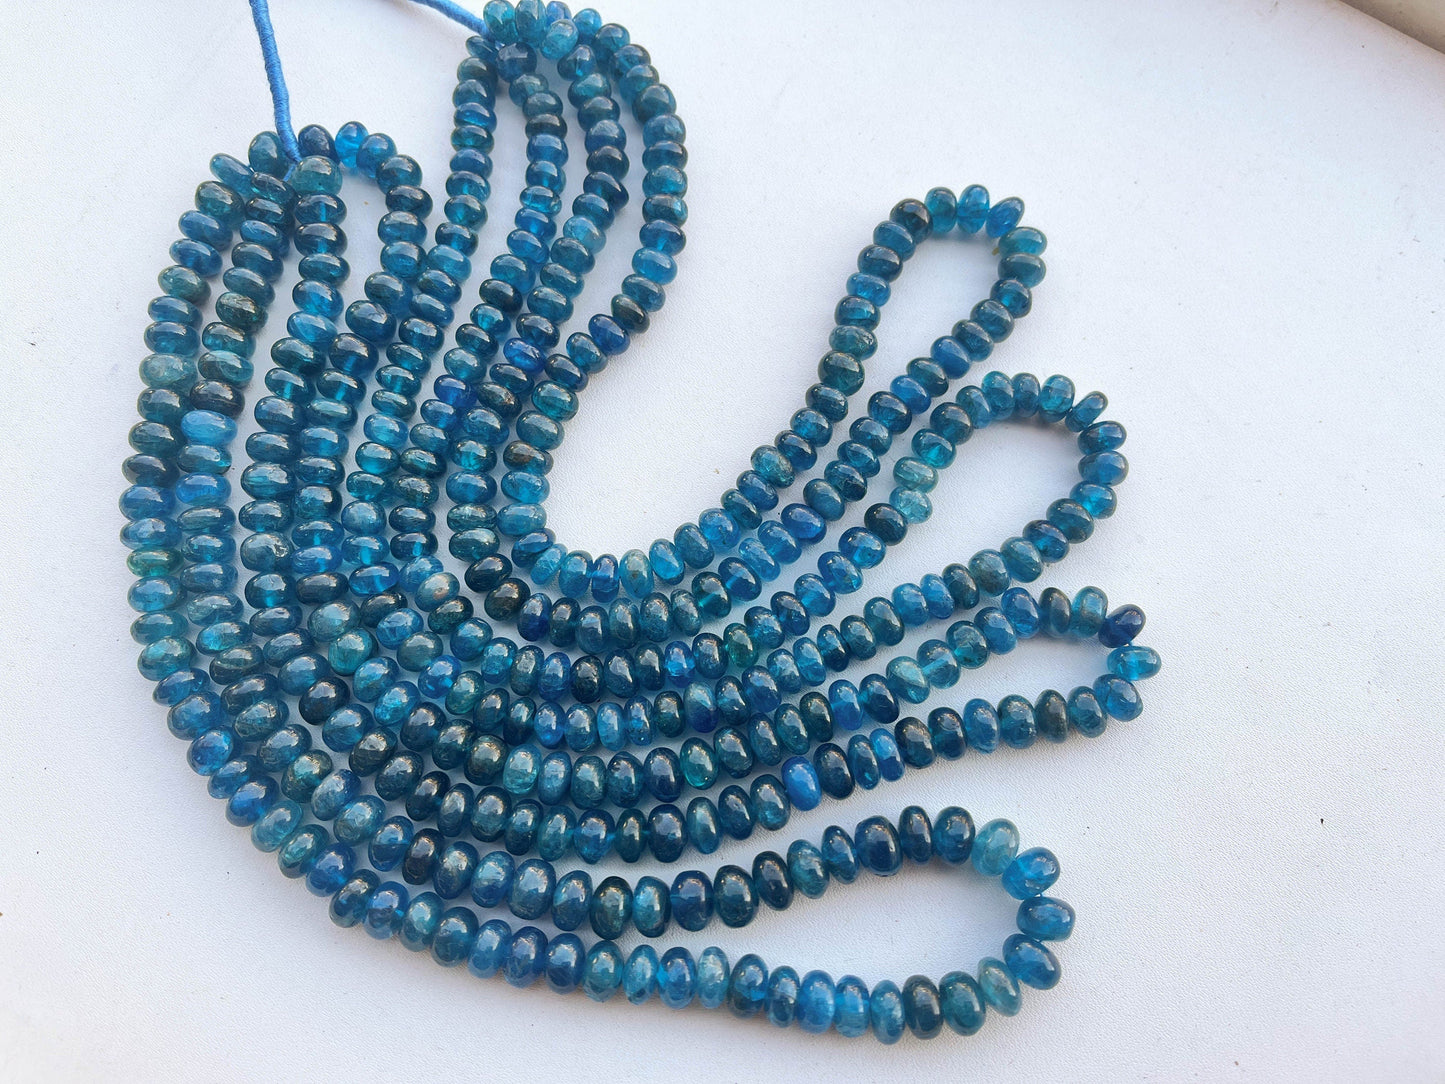 16 Inch Neon Blue Apatite Smooth Rondelle Shape Beads, Apatite Beads, Apatite Rondelle, Apatite Smooth Beads, 5 / 6 / 6.50 / 7.50 / 8mm Beadsforyourjewelry